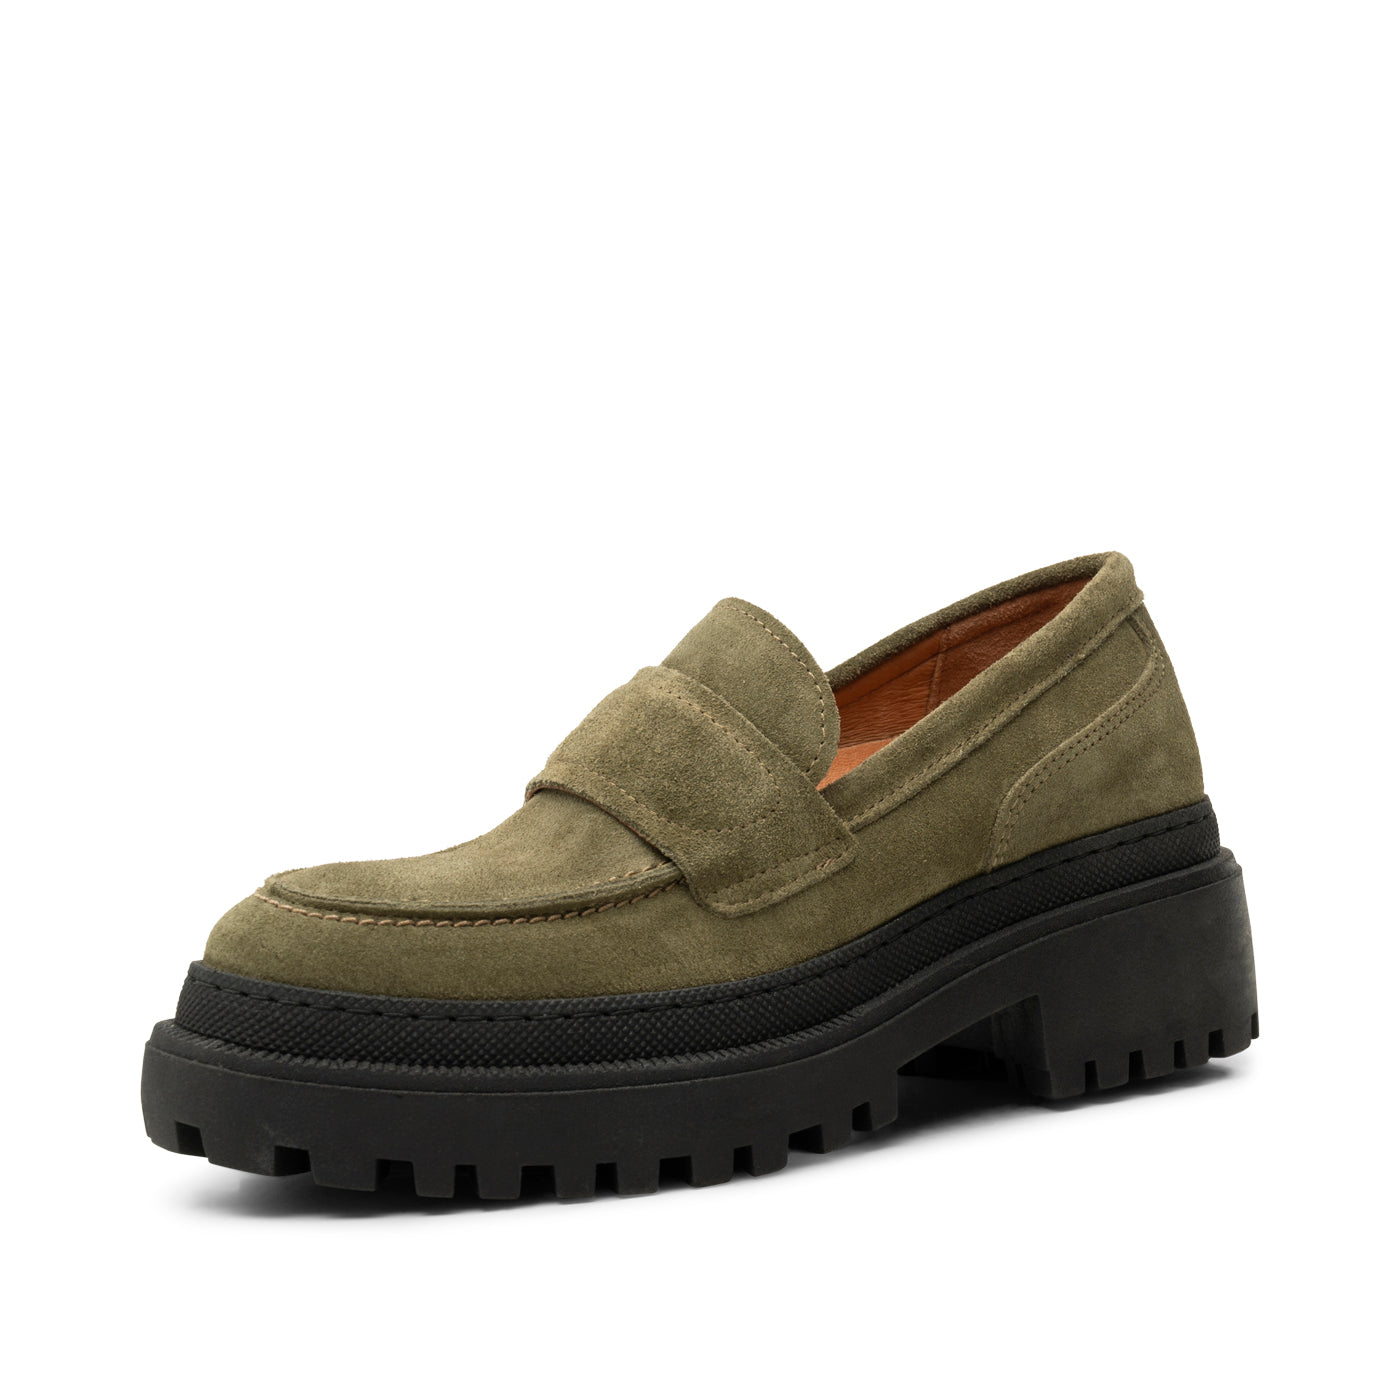 SHOE THE BEAR WOMENS Iona loafer suede Loafers 916 ALGAE